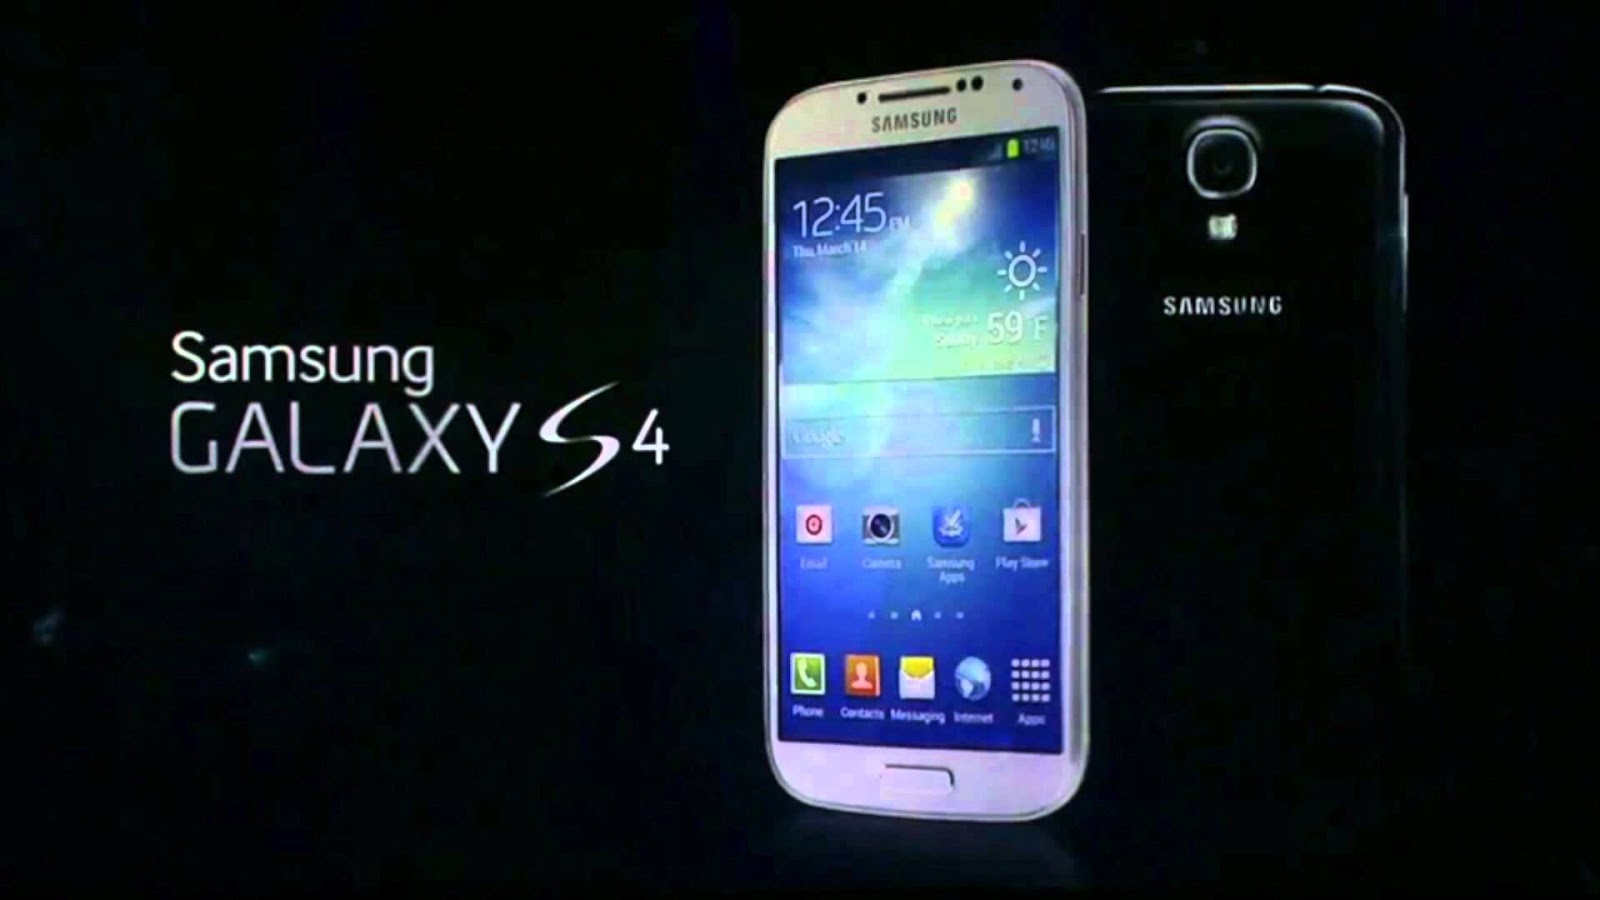 Galaxy S4 HD Wallpaper Check Out The Cool Samsung